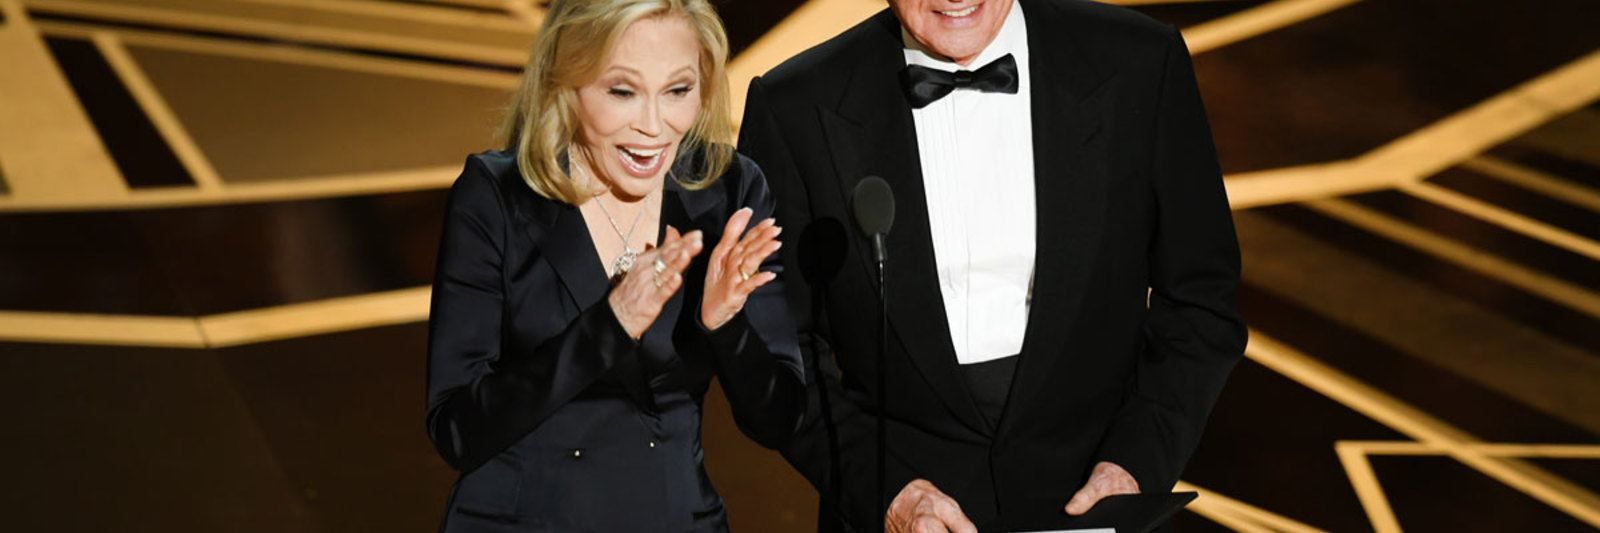 Actors Faye Dunaway (L) and Warren Beatty speak onstage during the 90th Annual Academy Awards at the Dolby Theatre at Hollywood & Highland Center on March 4, 2018 in Hollywood, California. (Photo by Kevin Winter/Getty Images)